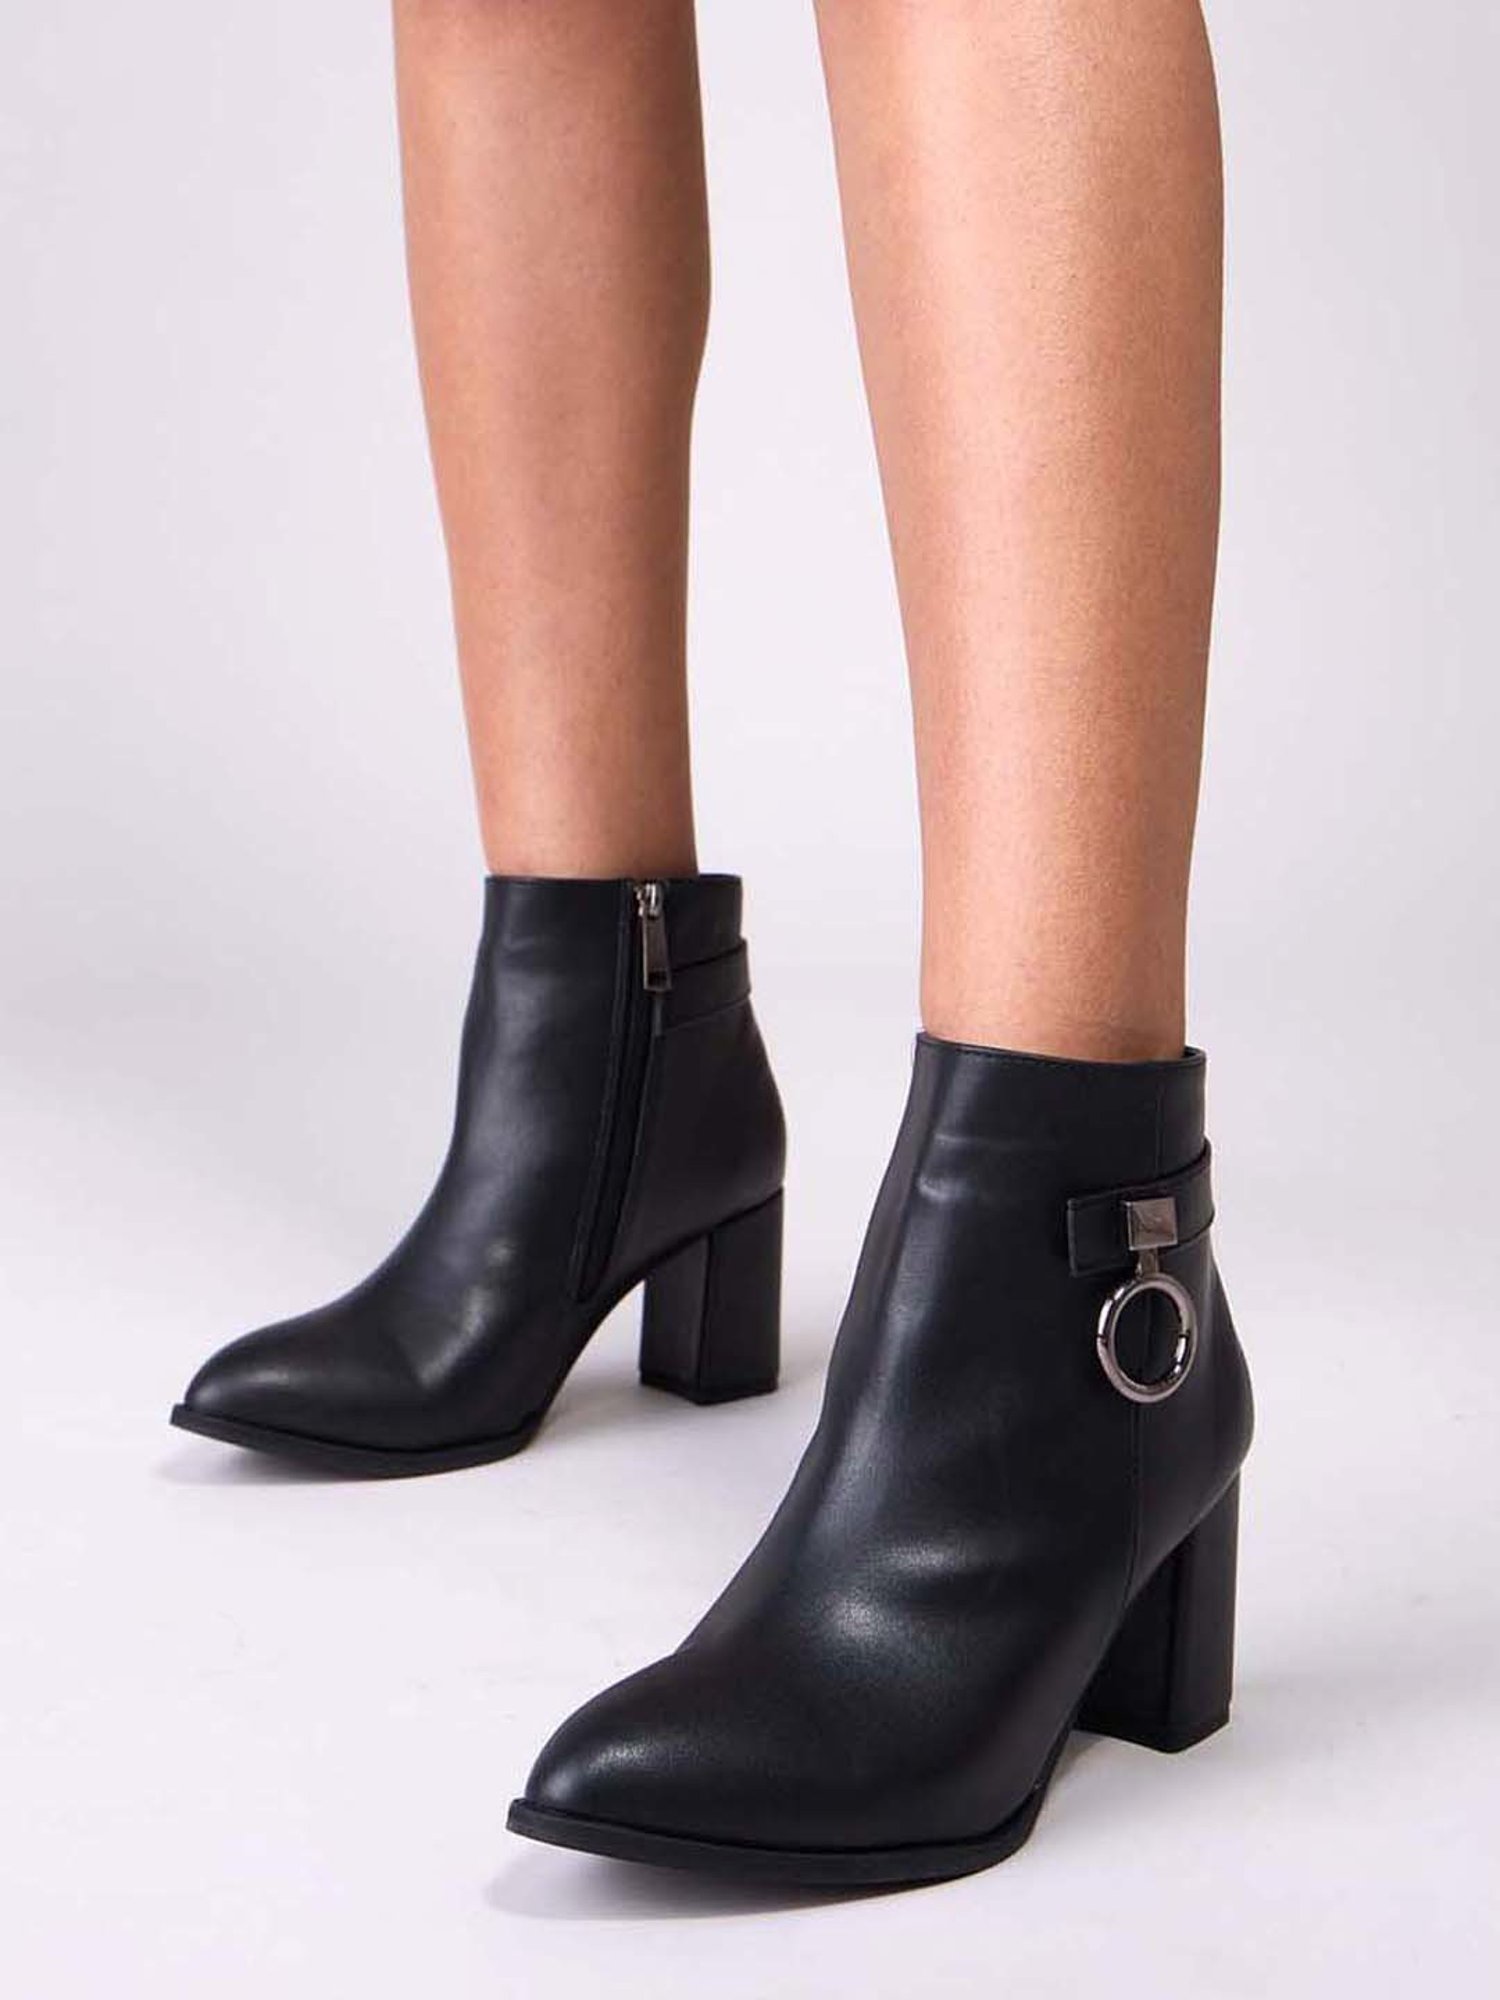 Isabel Marant Donatee Low Heels Ankle Boots In Black Leather, donatee -  thirstymag.com